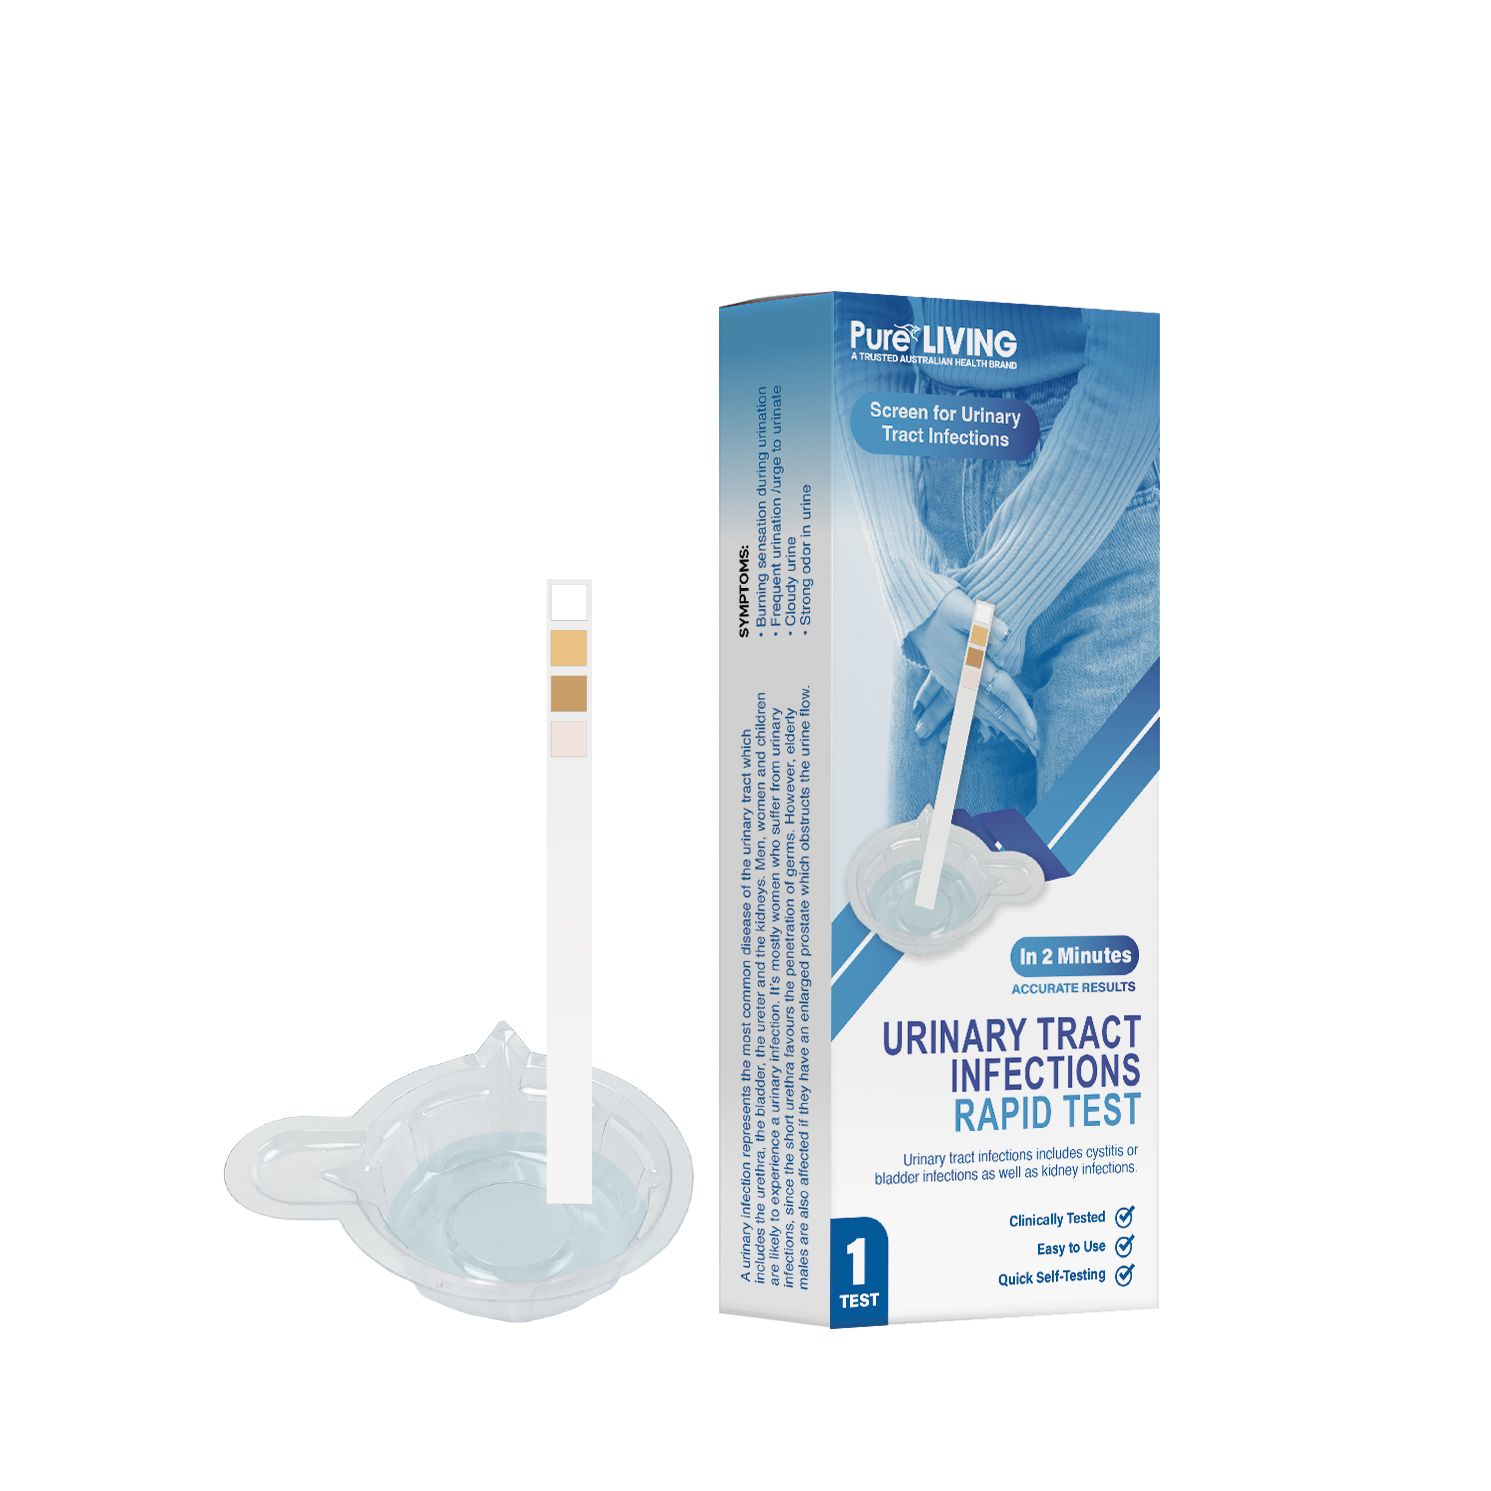 Urinary Tract Infections Rapid Test